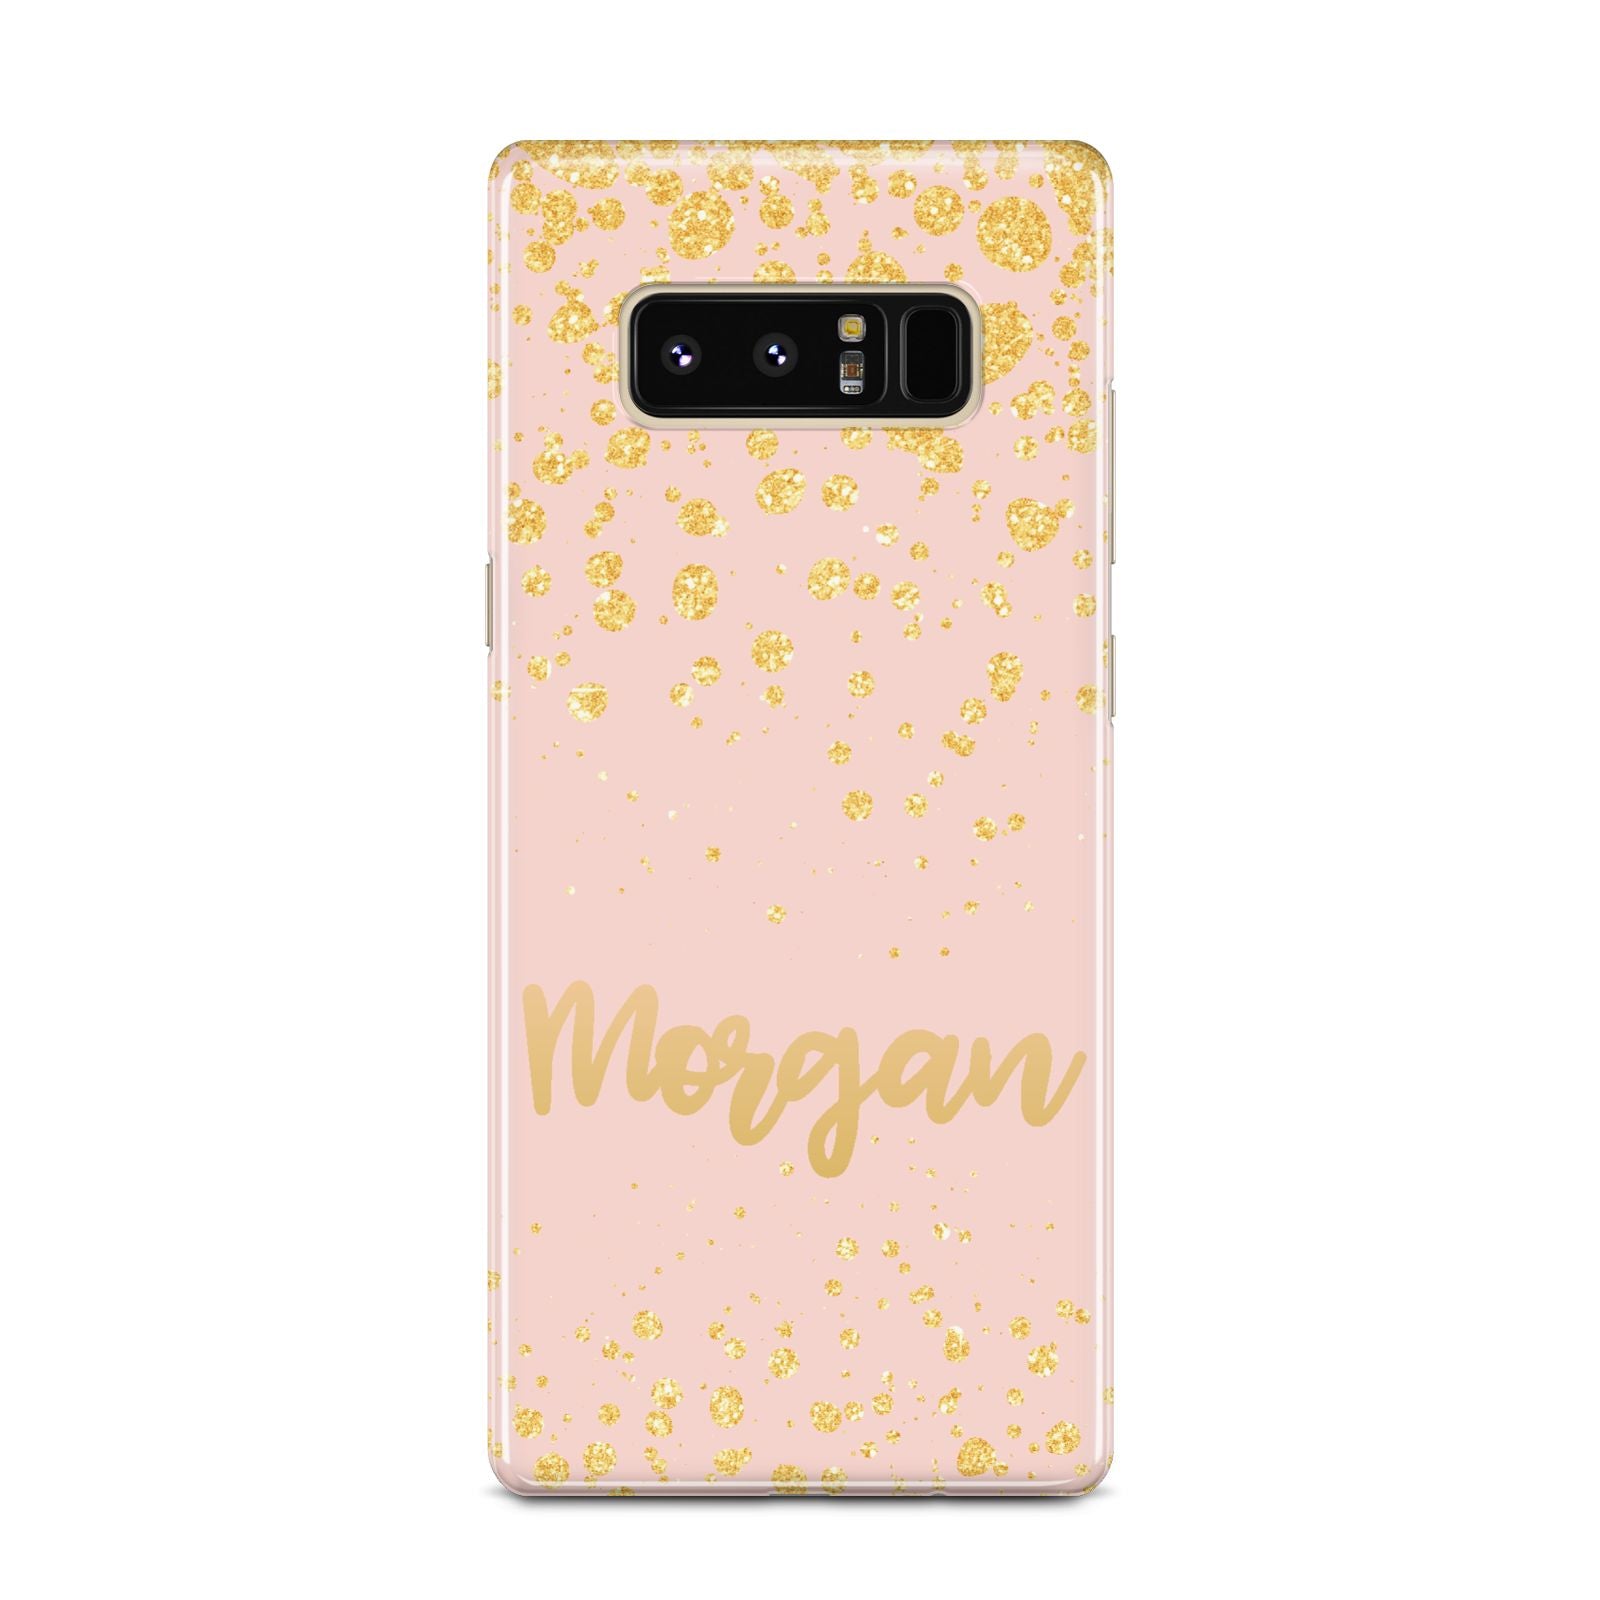 Personalised Pink Gold Splatter With Name Samsung Galaxy Note 8 Case